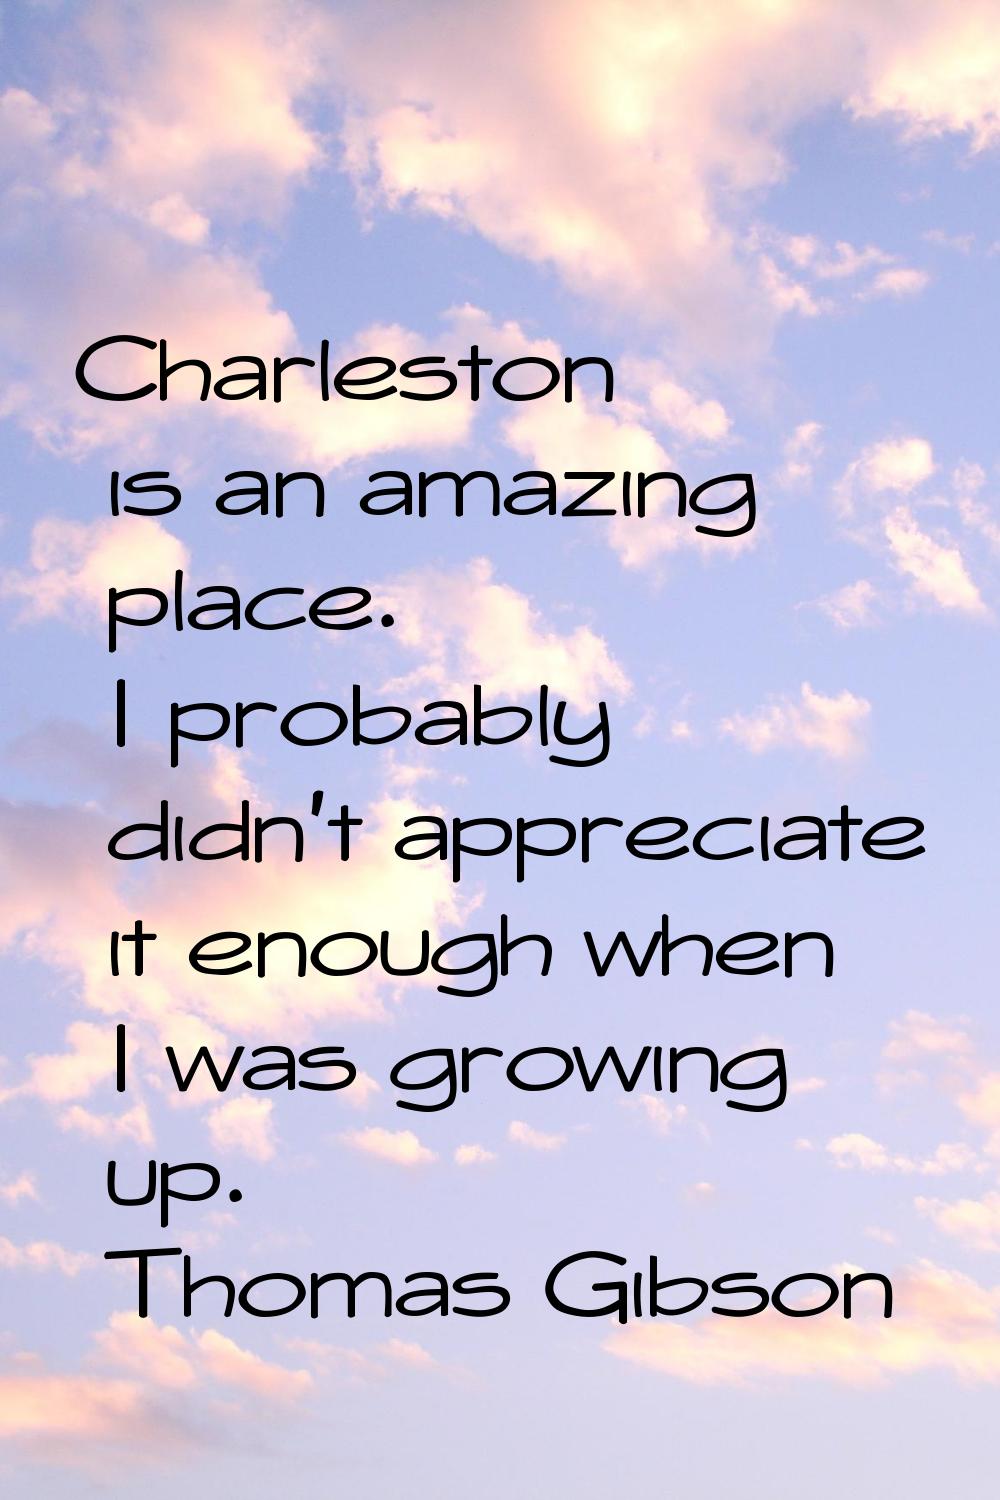 Charleston is an amazing place. I probably didn't appreciate it enough when I was growing up.